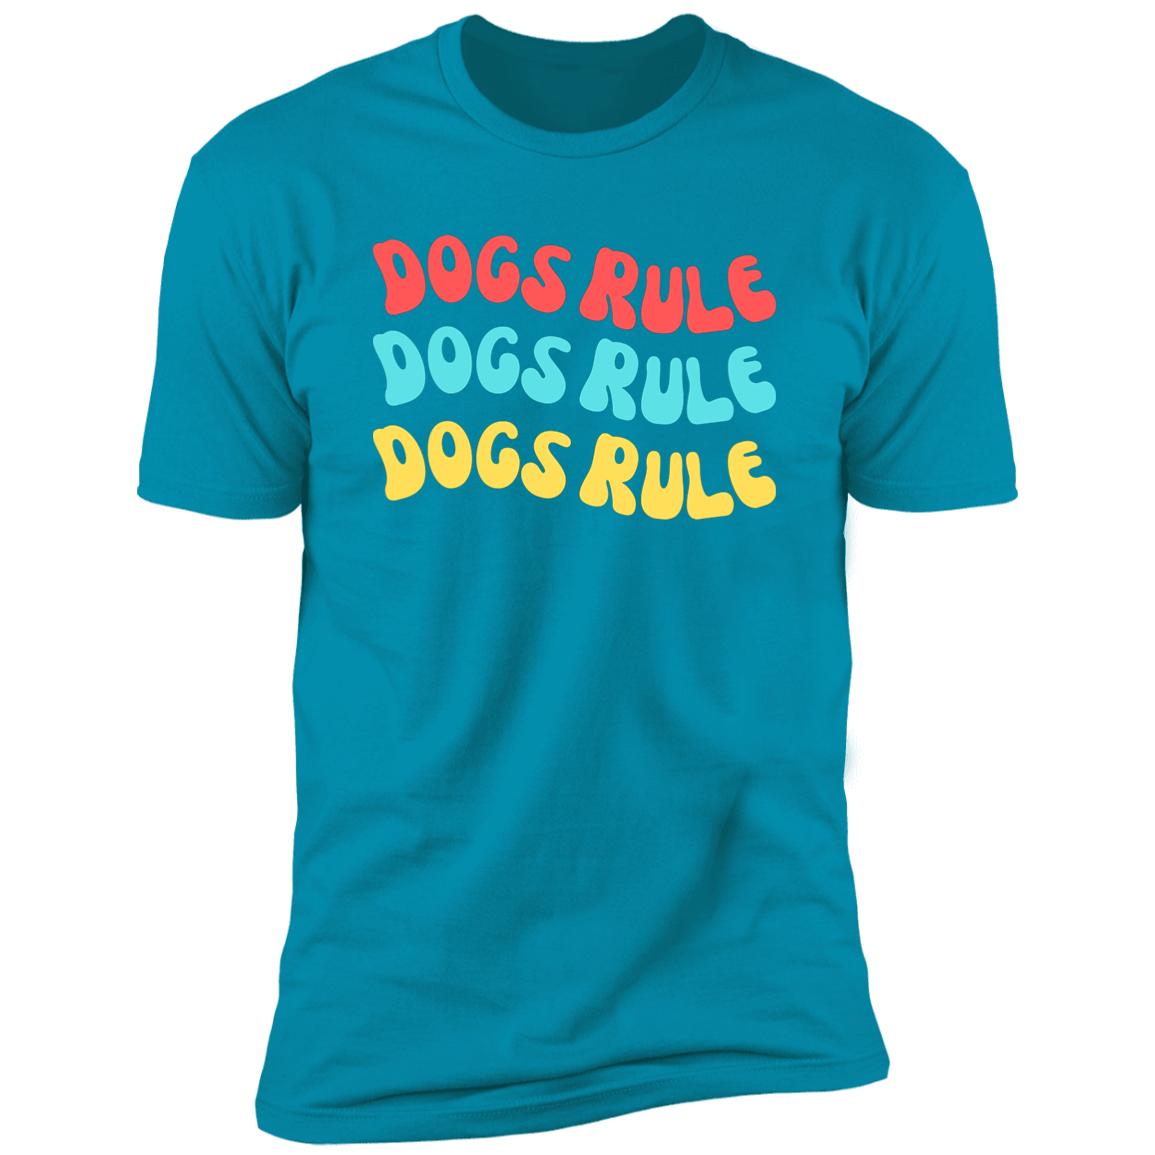 Dogs Rule Dog Shirt, dog shirt for humans, dog mom and dog dad shirt, in turquoise 